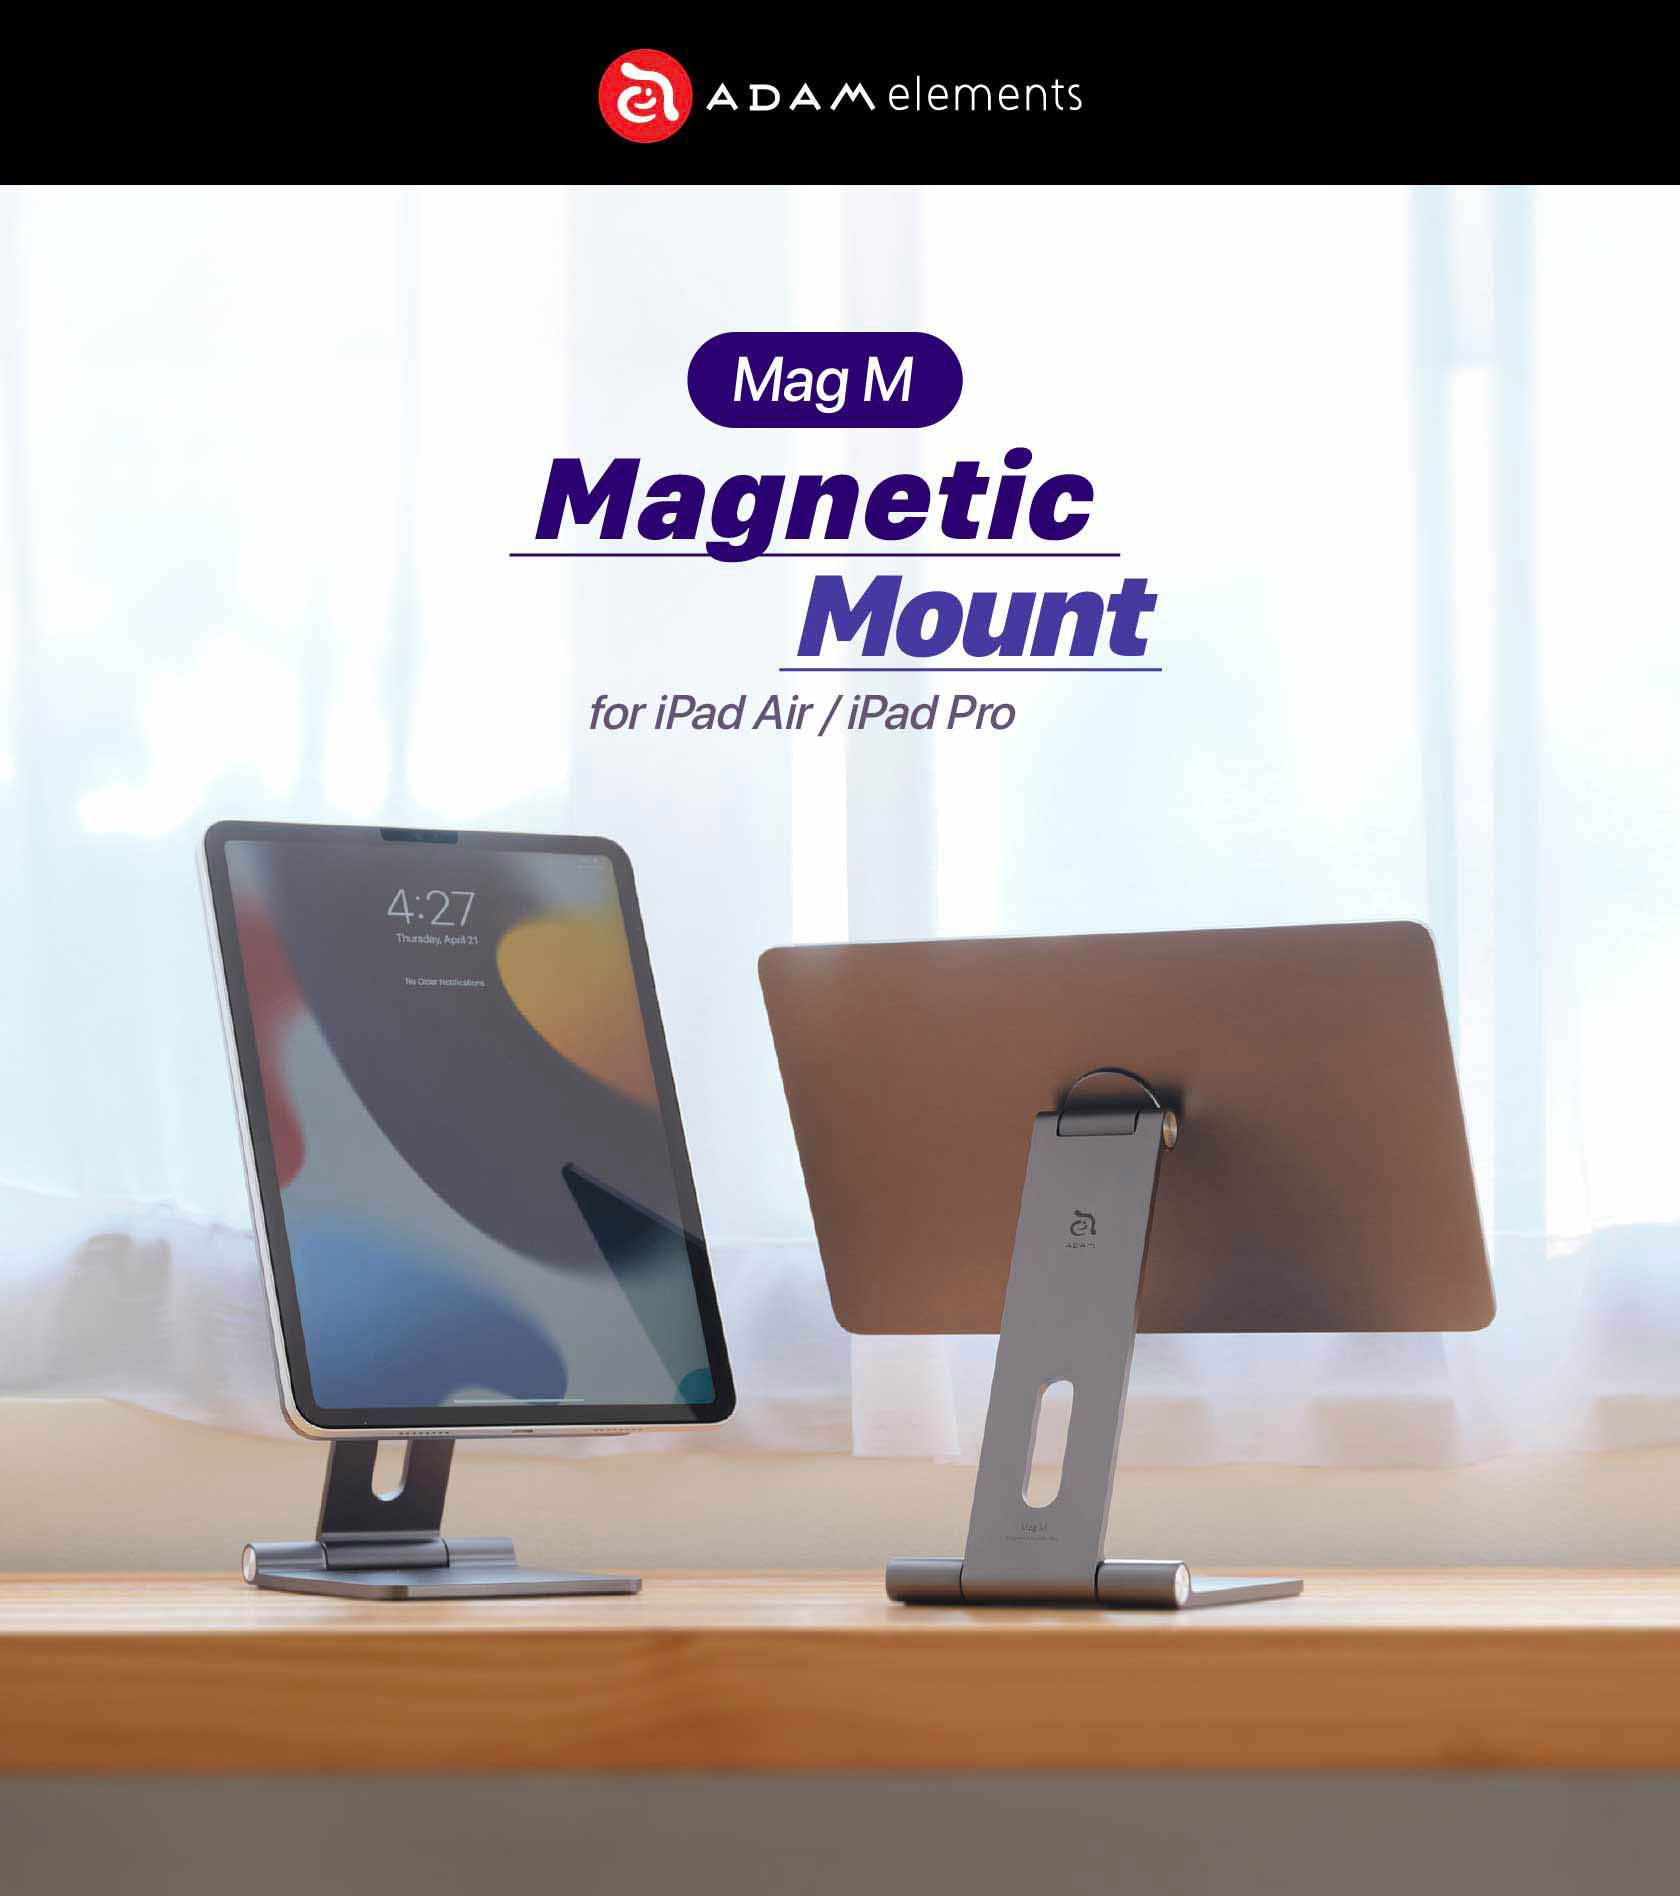 Mag M Magnetic Mount for iPad Air iPad Pro 1 1